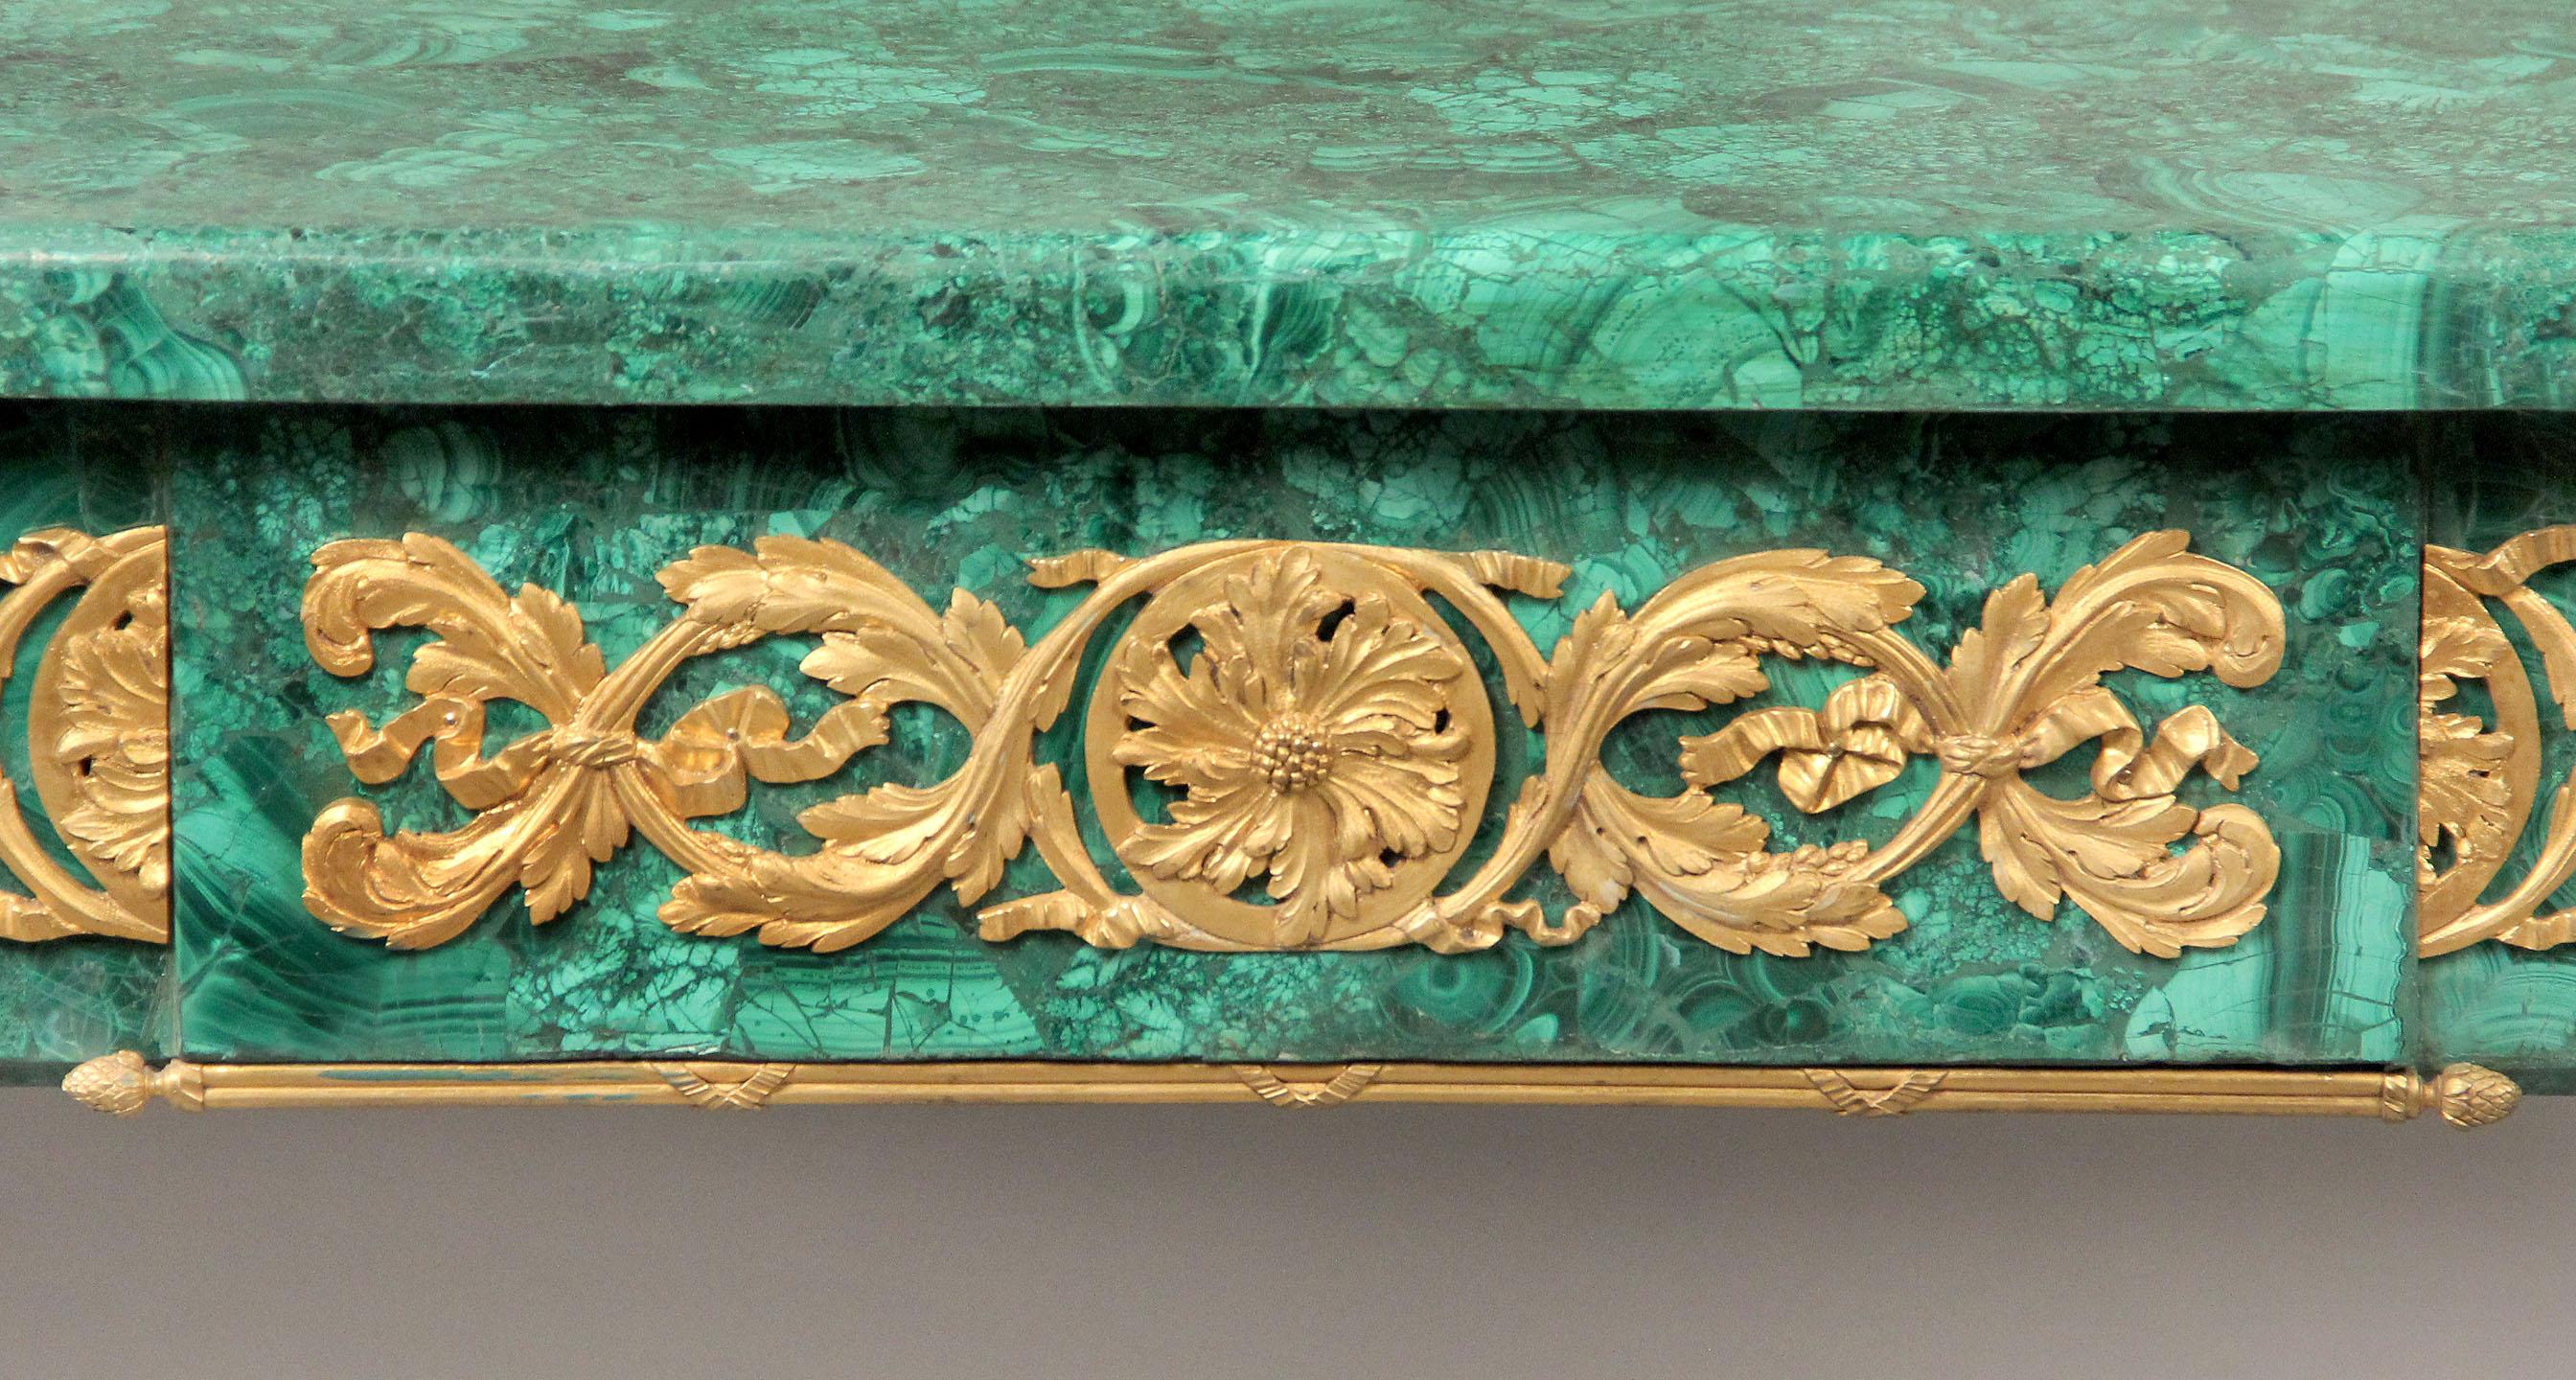 A nice quality late 19th century gilt bronze mounted Louis XV Style malachite center table

Decorative malachite top above bronze frieze, bronze-mounted tapering legs sitting on lion paw feet.

Malachite is a semi-precious stone and also a